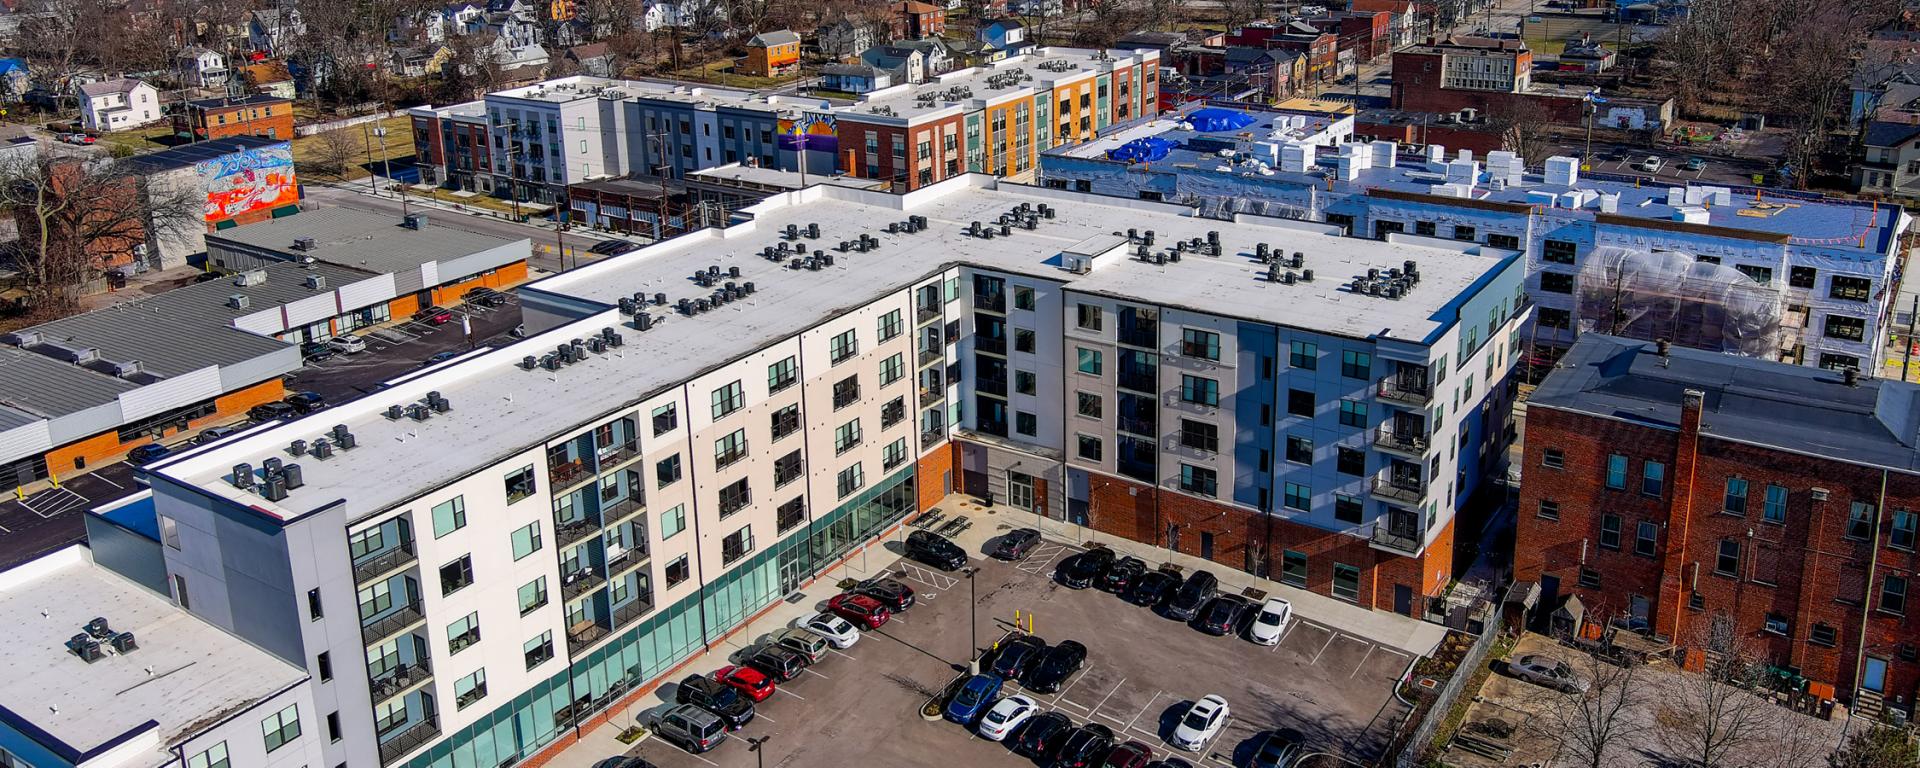 aerial photo of apartment building and parking lot